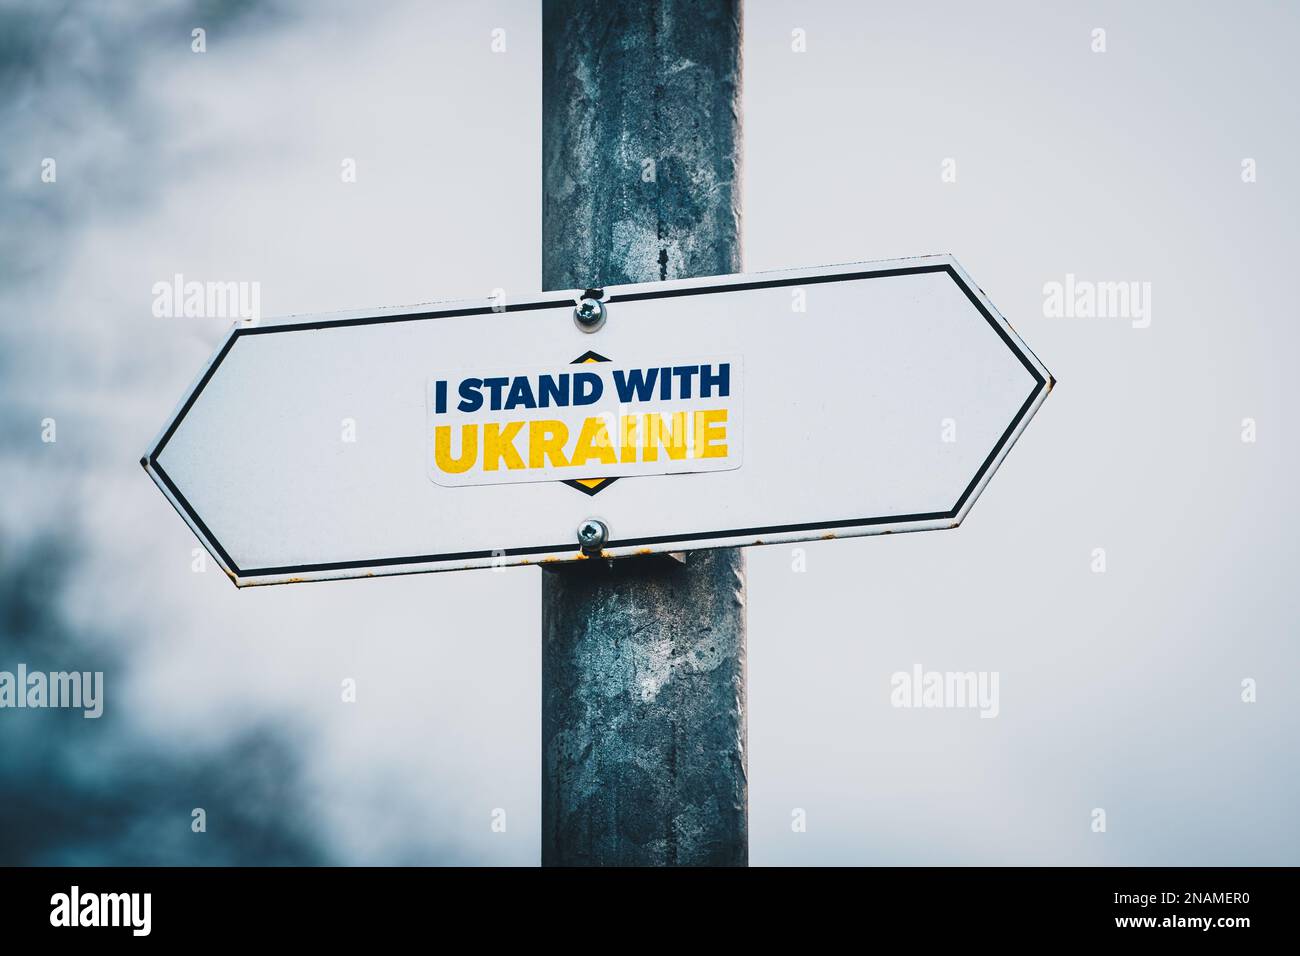 I stand with Ukraine - political statement - badge on trail sign - loyalty pro Ukraine against war - no retreat no surrender Stock Photo